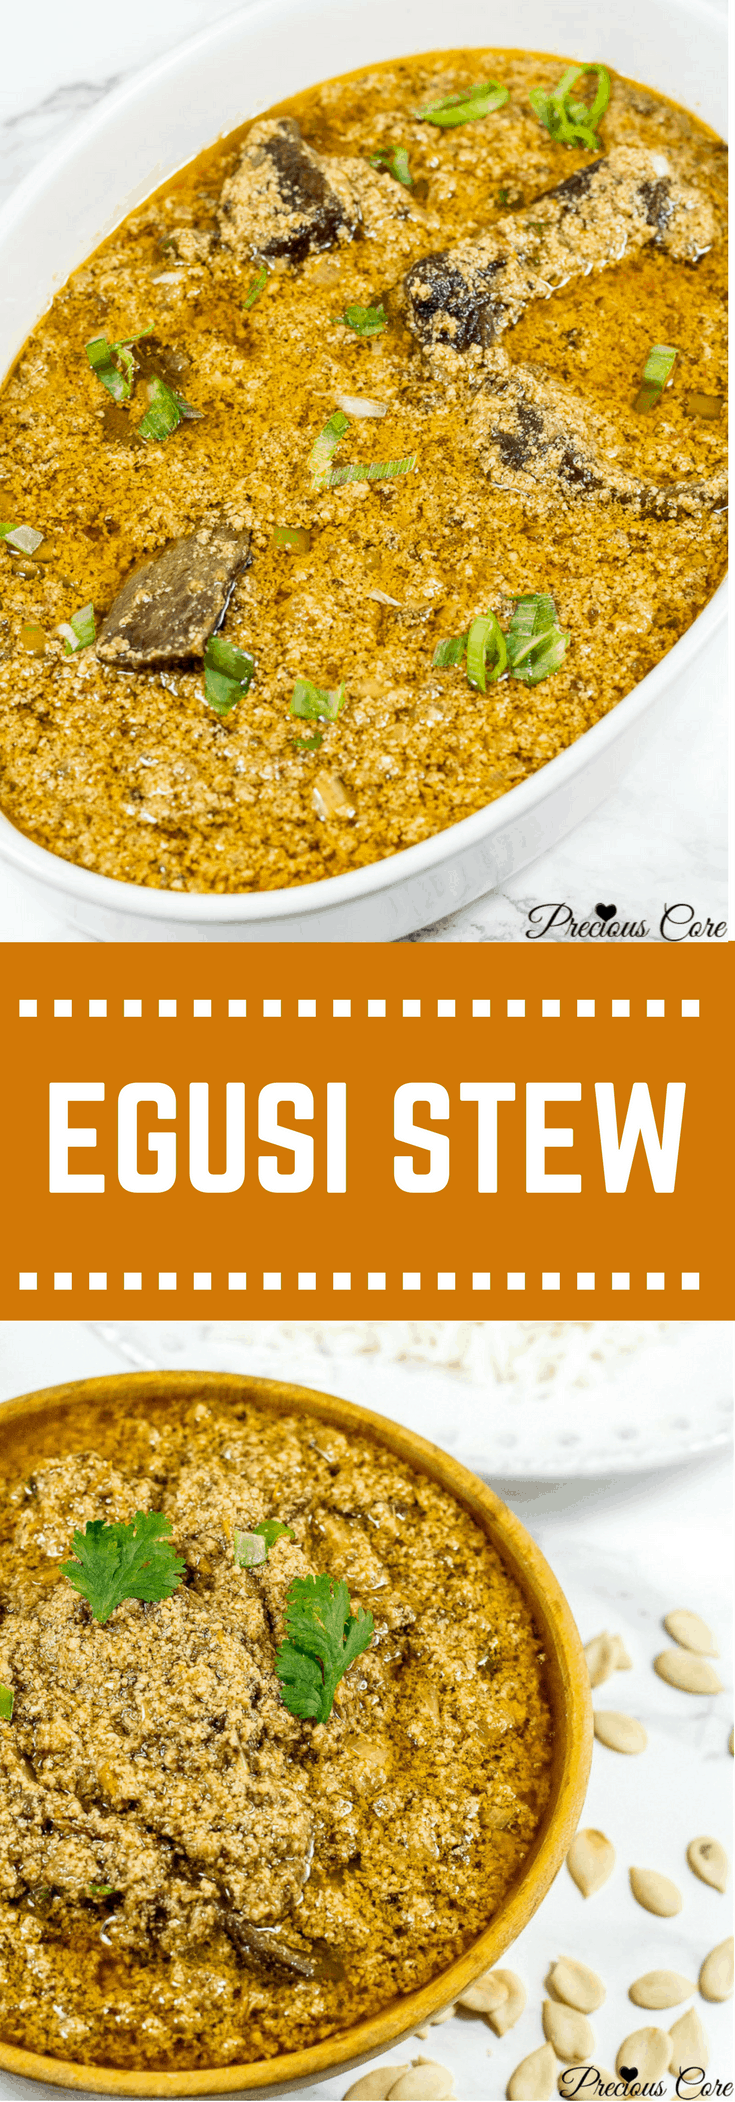 How to make luscious egusi (pumpkin seeds) stew with beef. This stew is great on boiled rice. You could also enjoy it with plantains, potatoes or even yams. Get the full recipe on PreciousCore.com. #AfricanFood #Stews